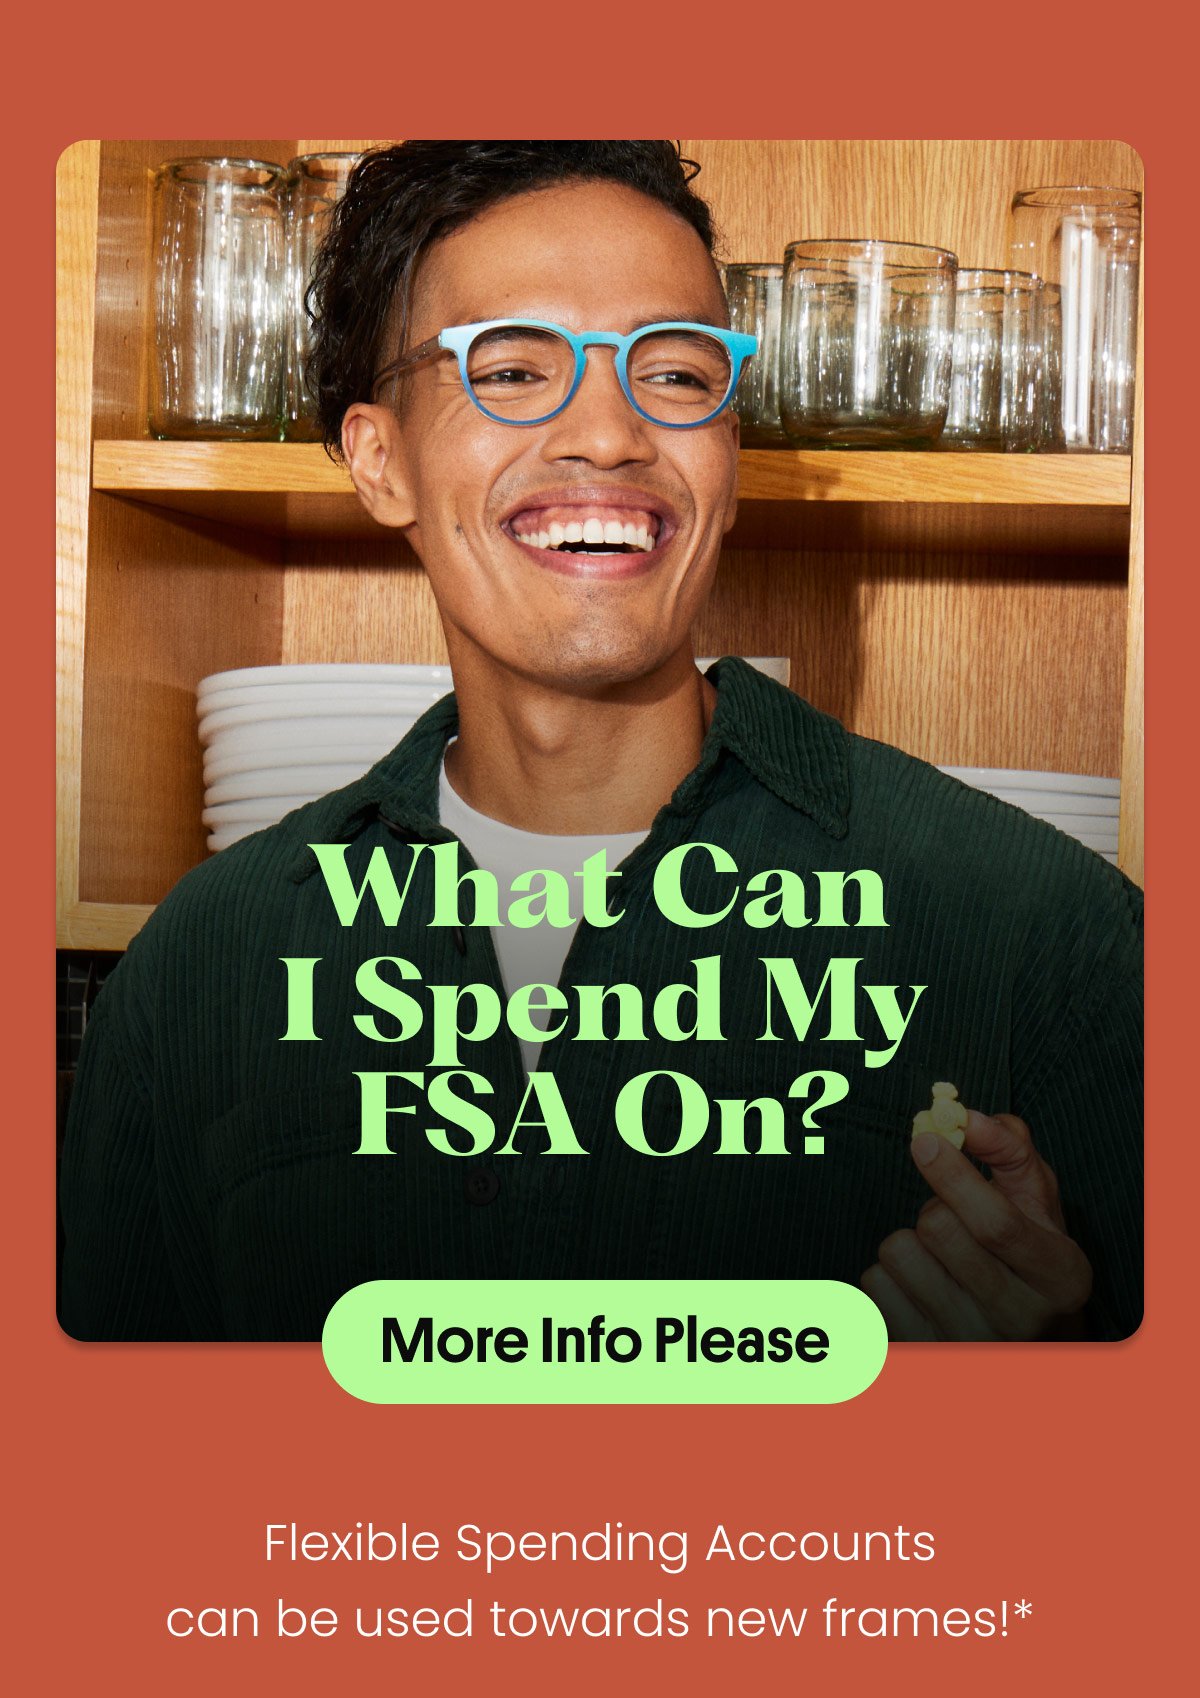 What Can I Spend My FSA On?